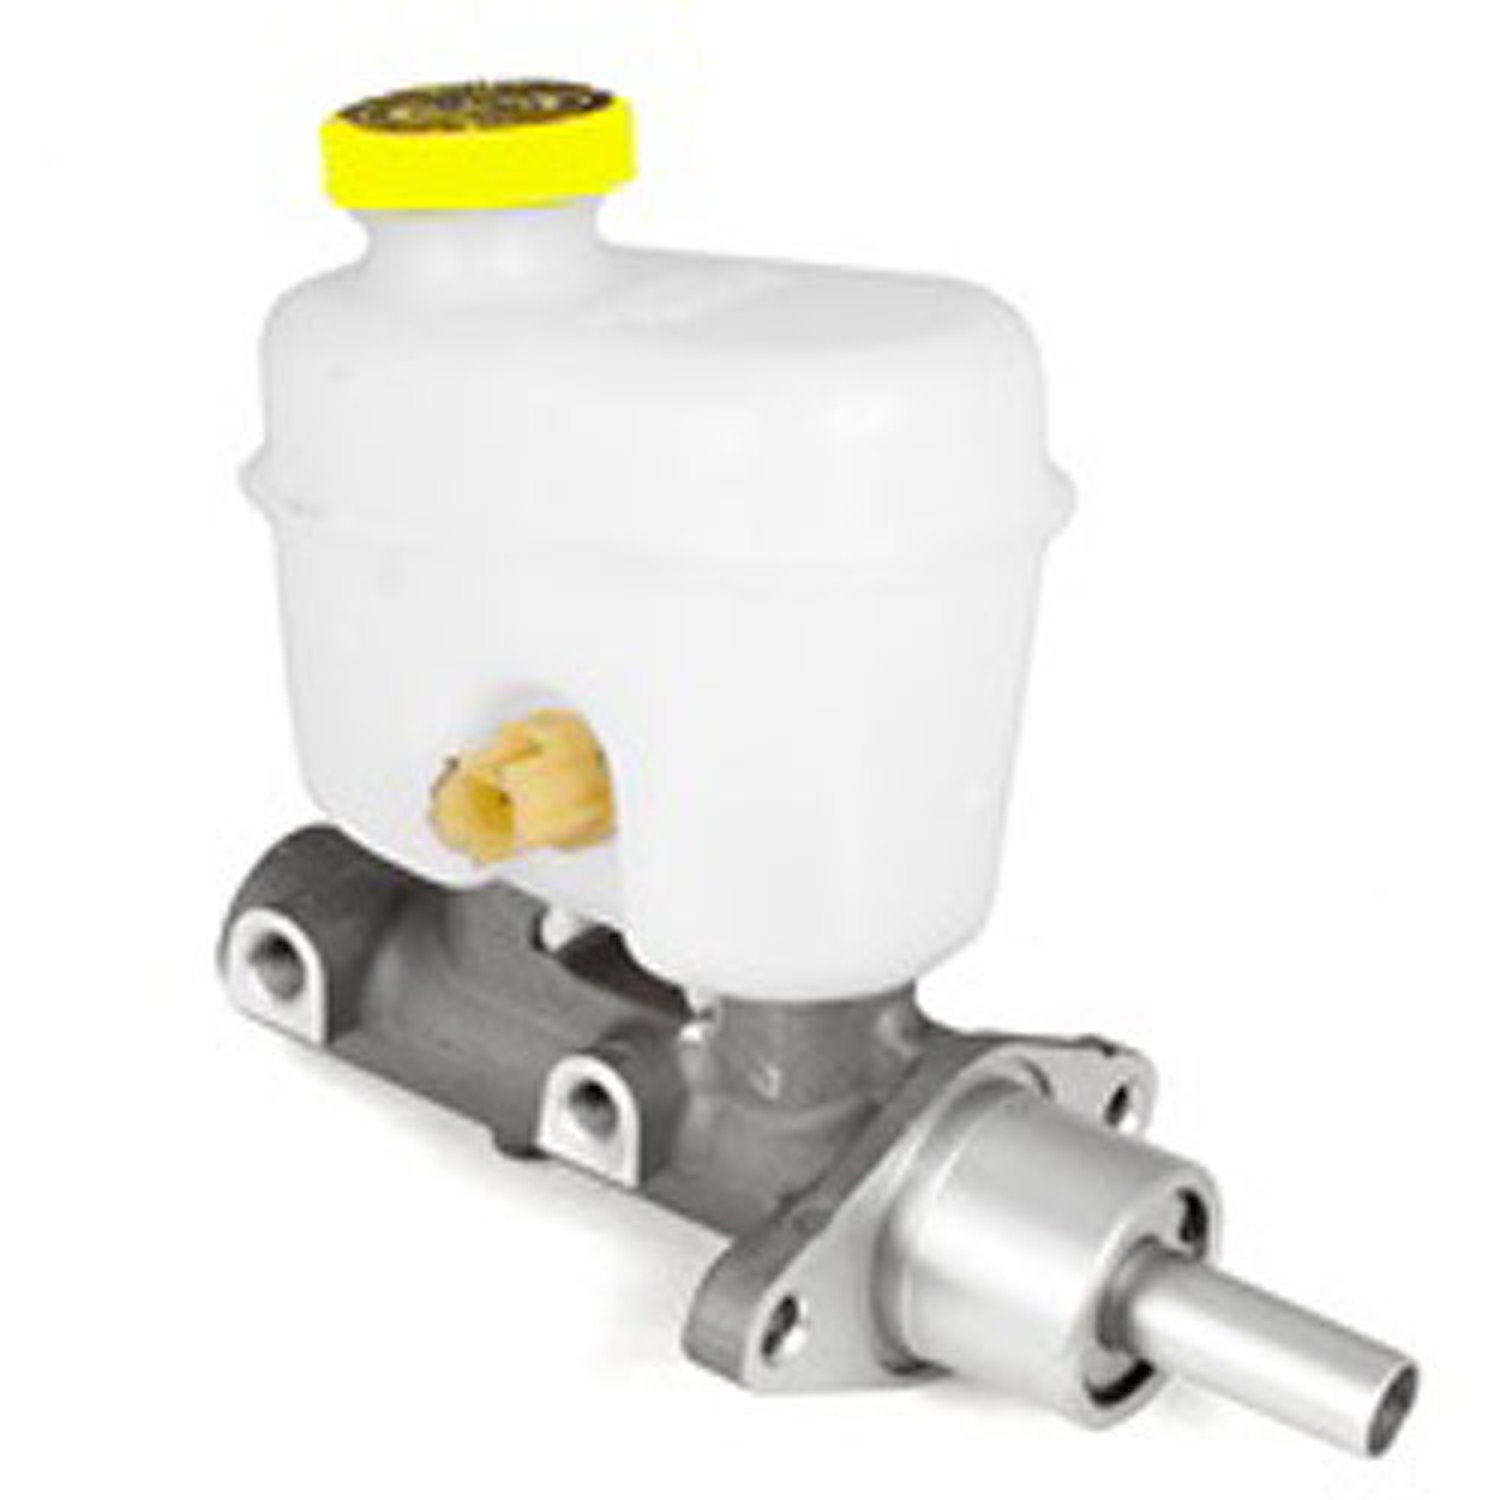 This brake master cylinder from Omix-ADA fits 99-04 Jeep Grand Cherokees.